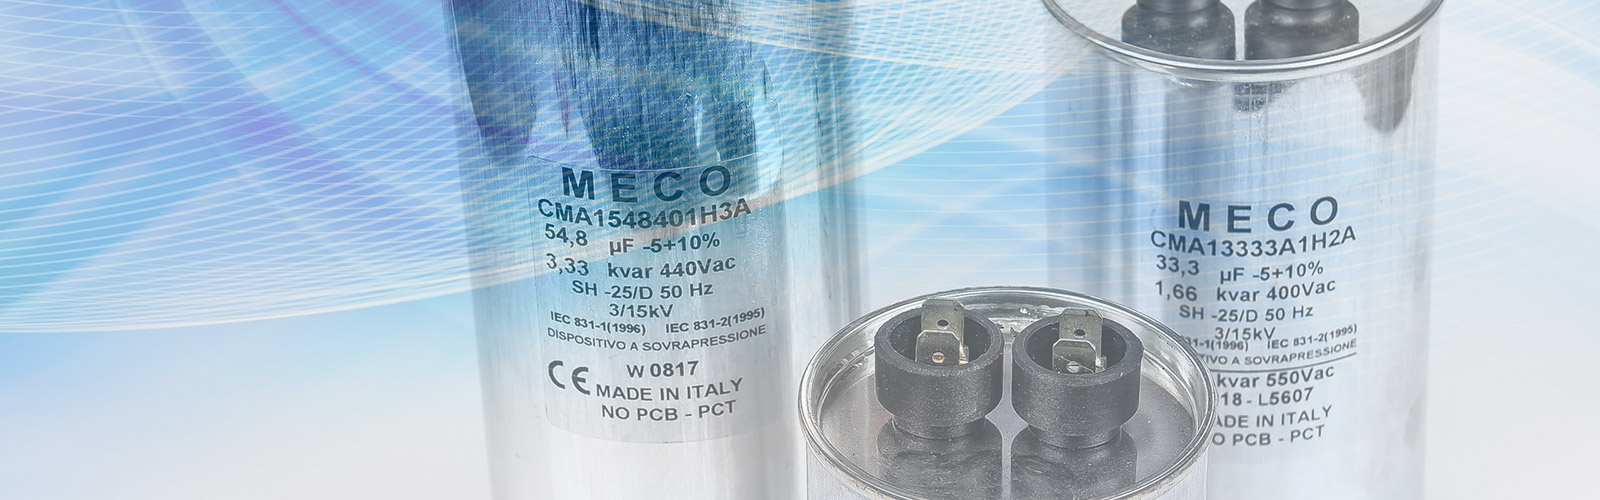 , POWER FACTOR CORRECTION, Meco Capacitors